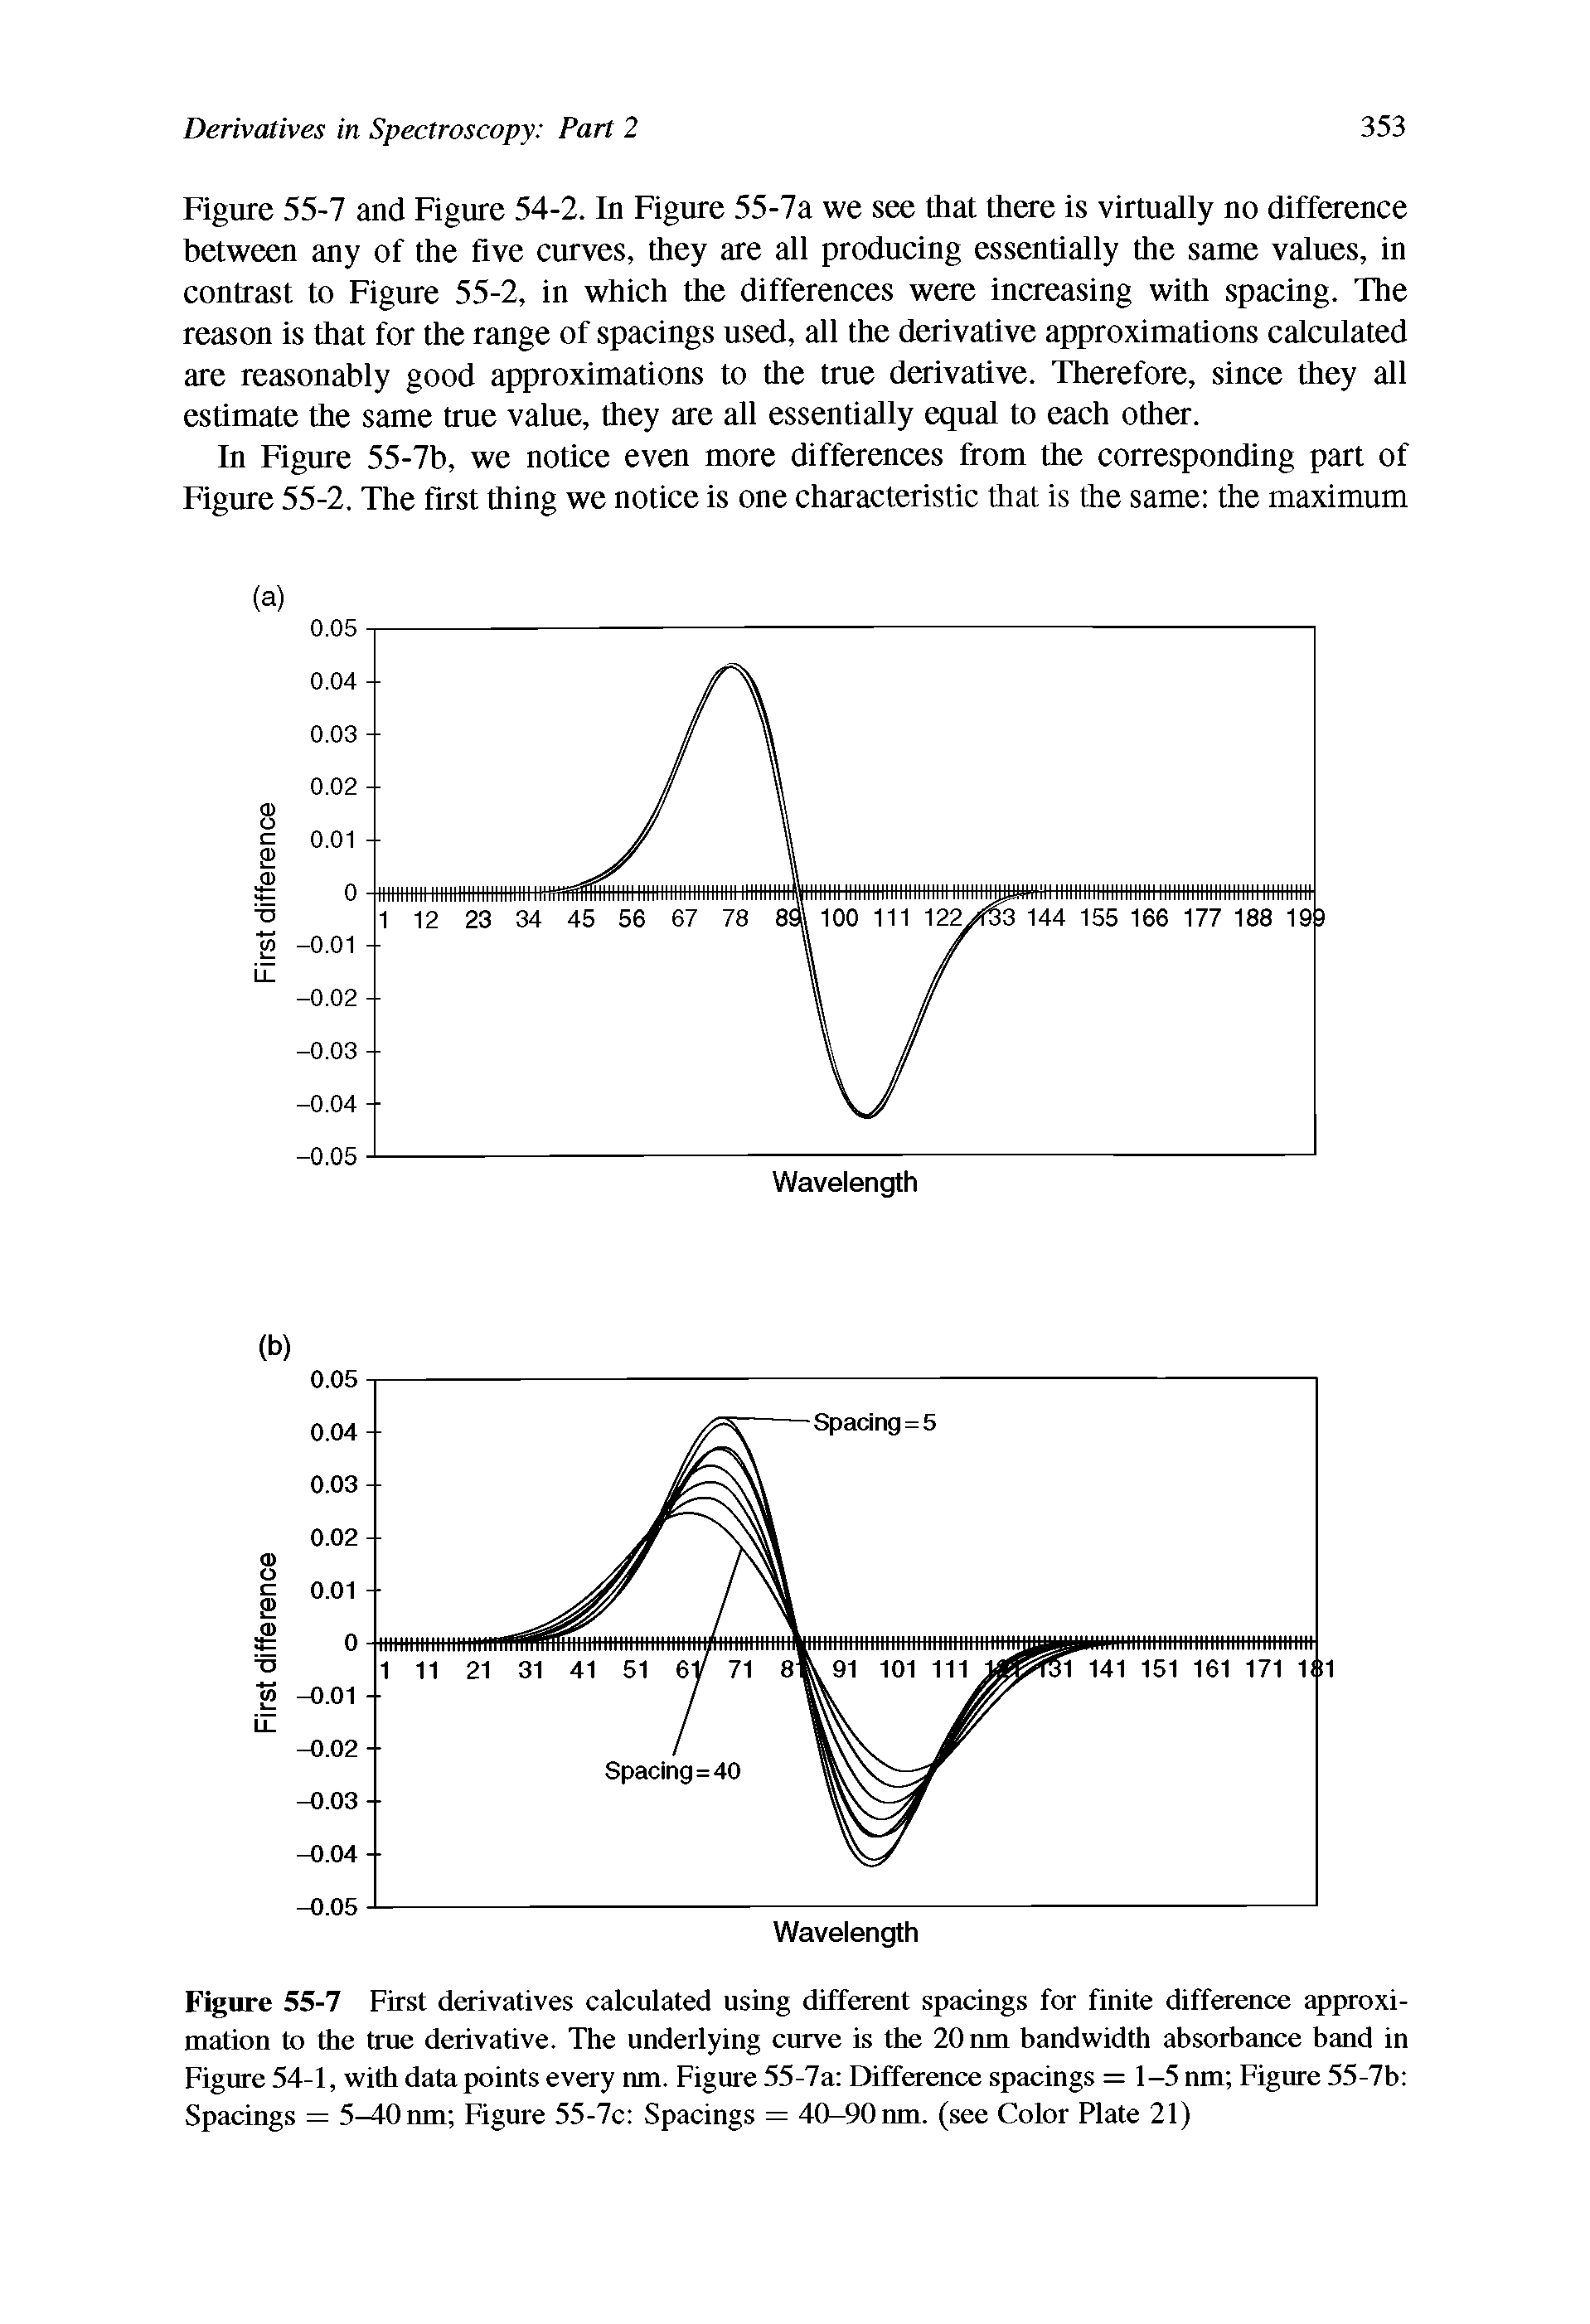 Figure 55-7 First derivatives calculated using different spacings for finite difference approximation to the true derivative. The underlying curve is the 20 run bandwidth absorbance band in Figure 54-1, with data points every nm. Figure 55-7a Difference spacings = 1-5 nm Figure 55-7b Spacings = 5 10 run Figure 55-7c Spacings = 40-90 nm. (see Color Plate 21)...